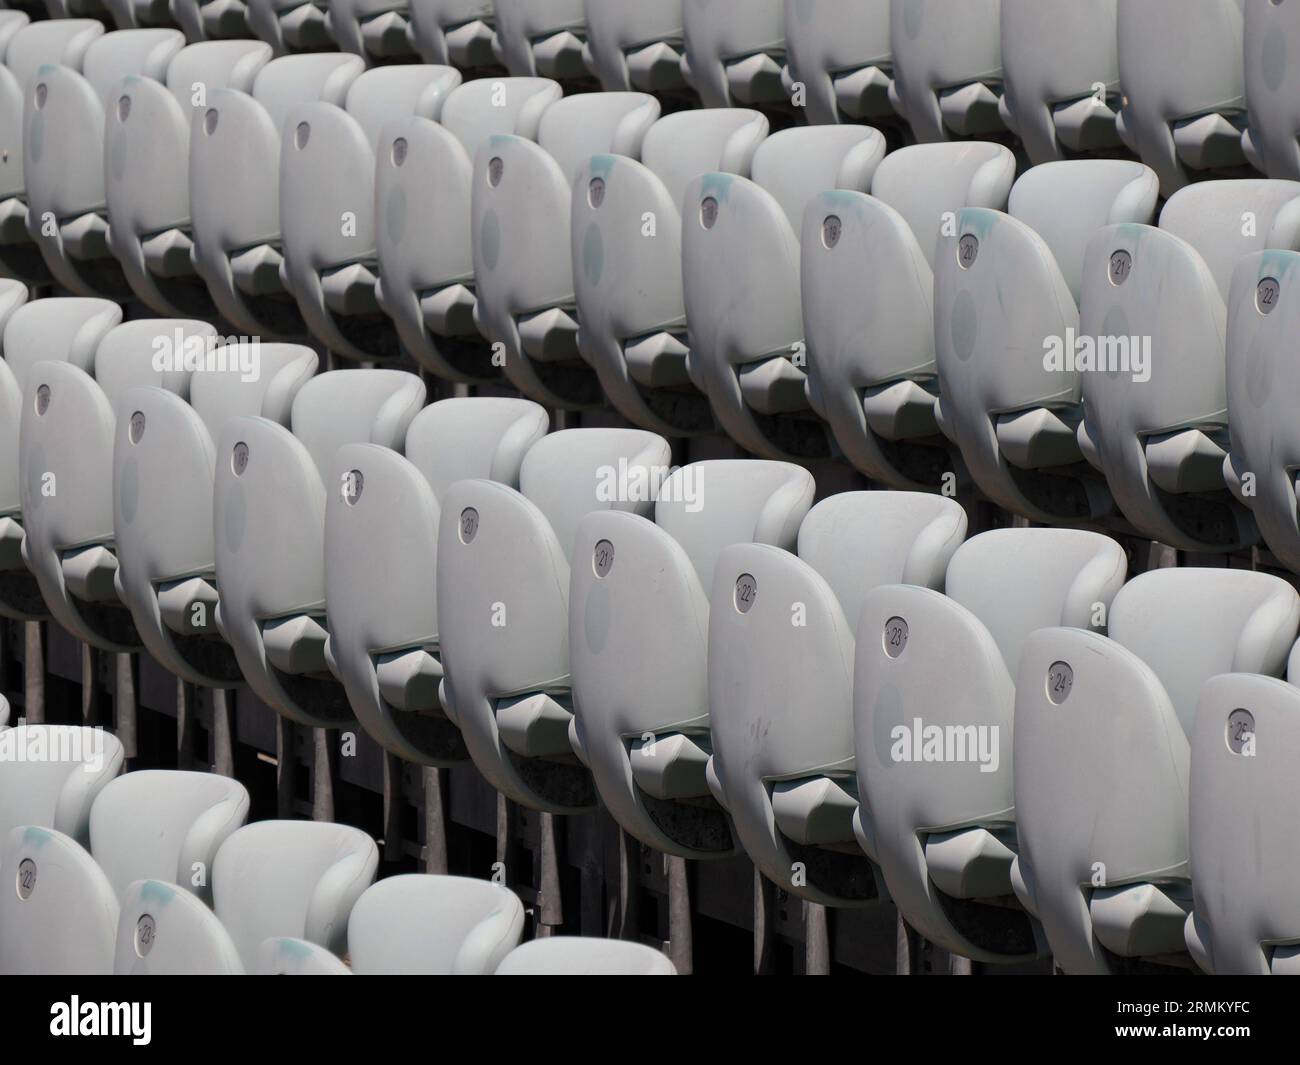 Rows of numbered empty plastic seats at an open-air amphitheater many audience open theater seats Stock Photo